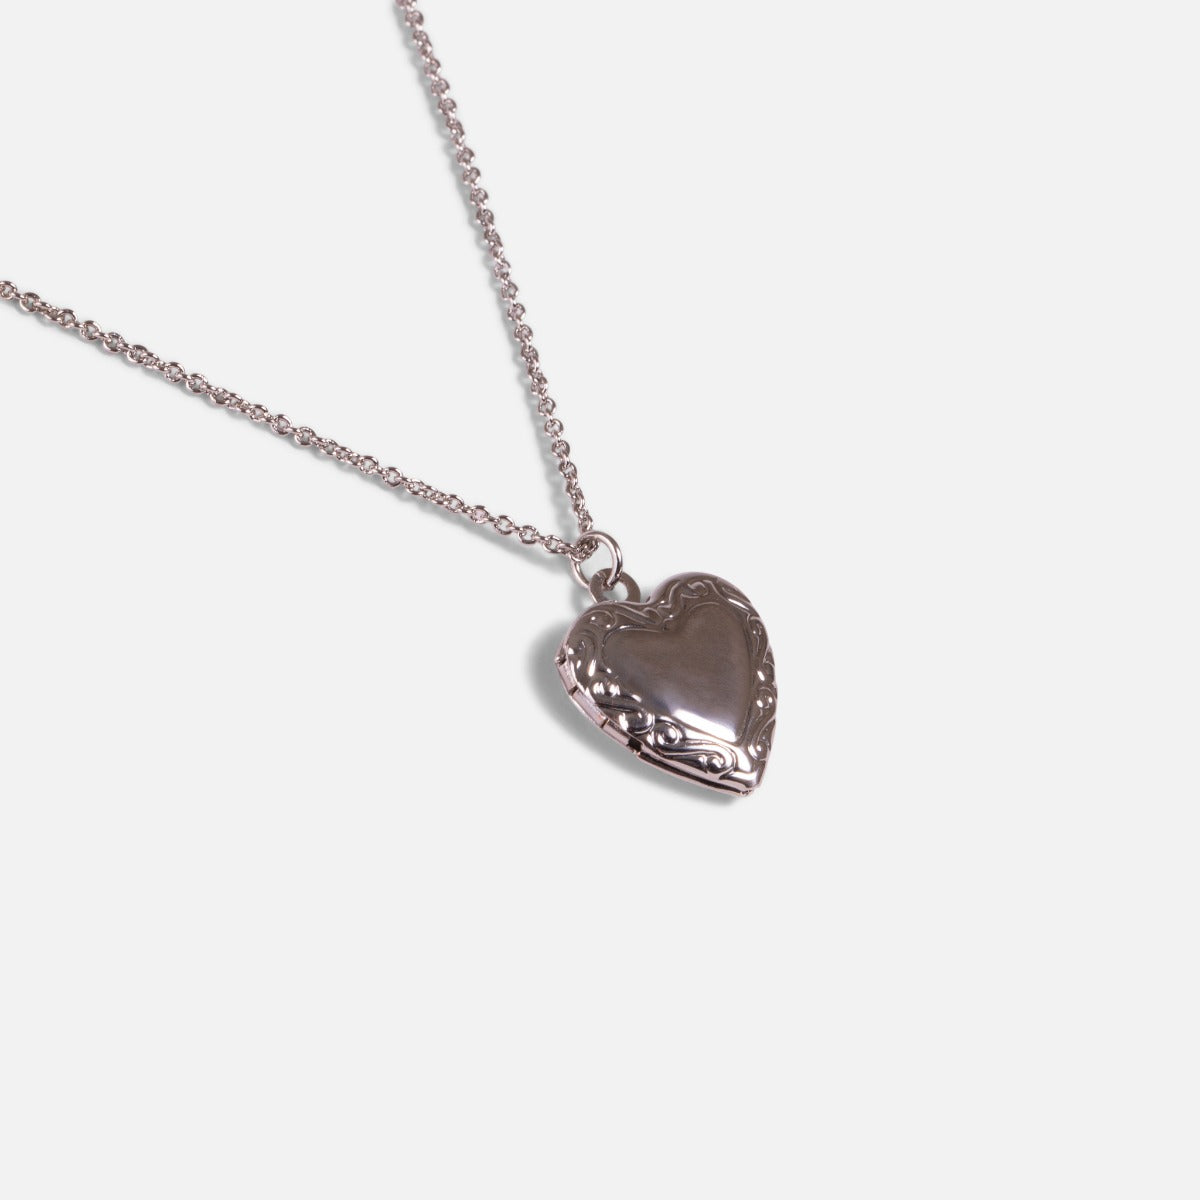 Pendant with reclosable heart with love quote